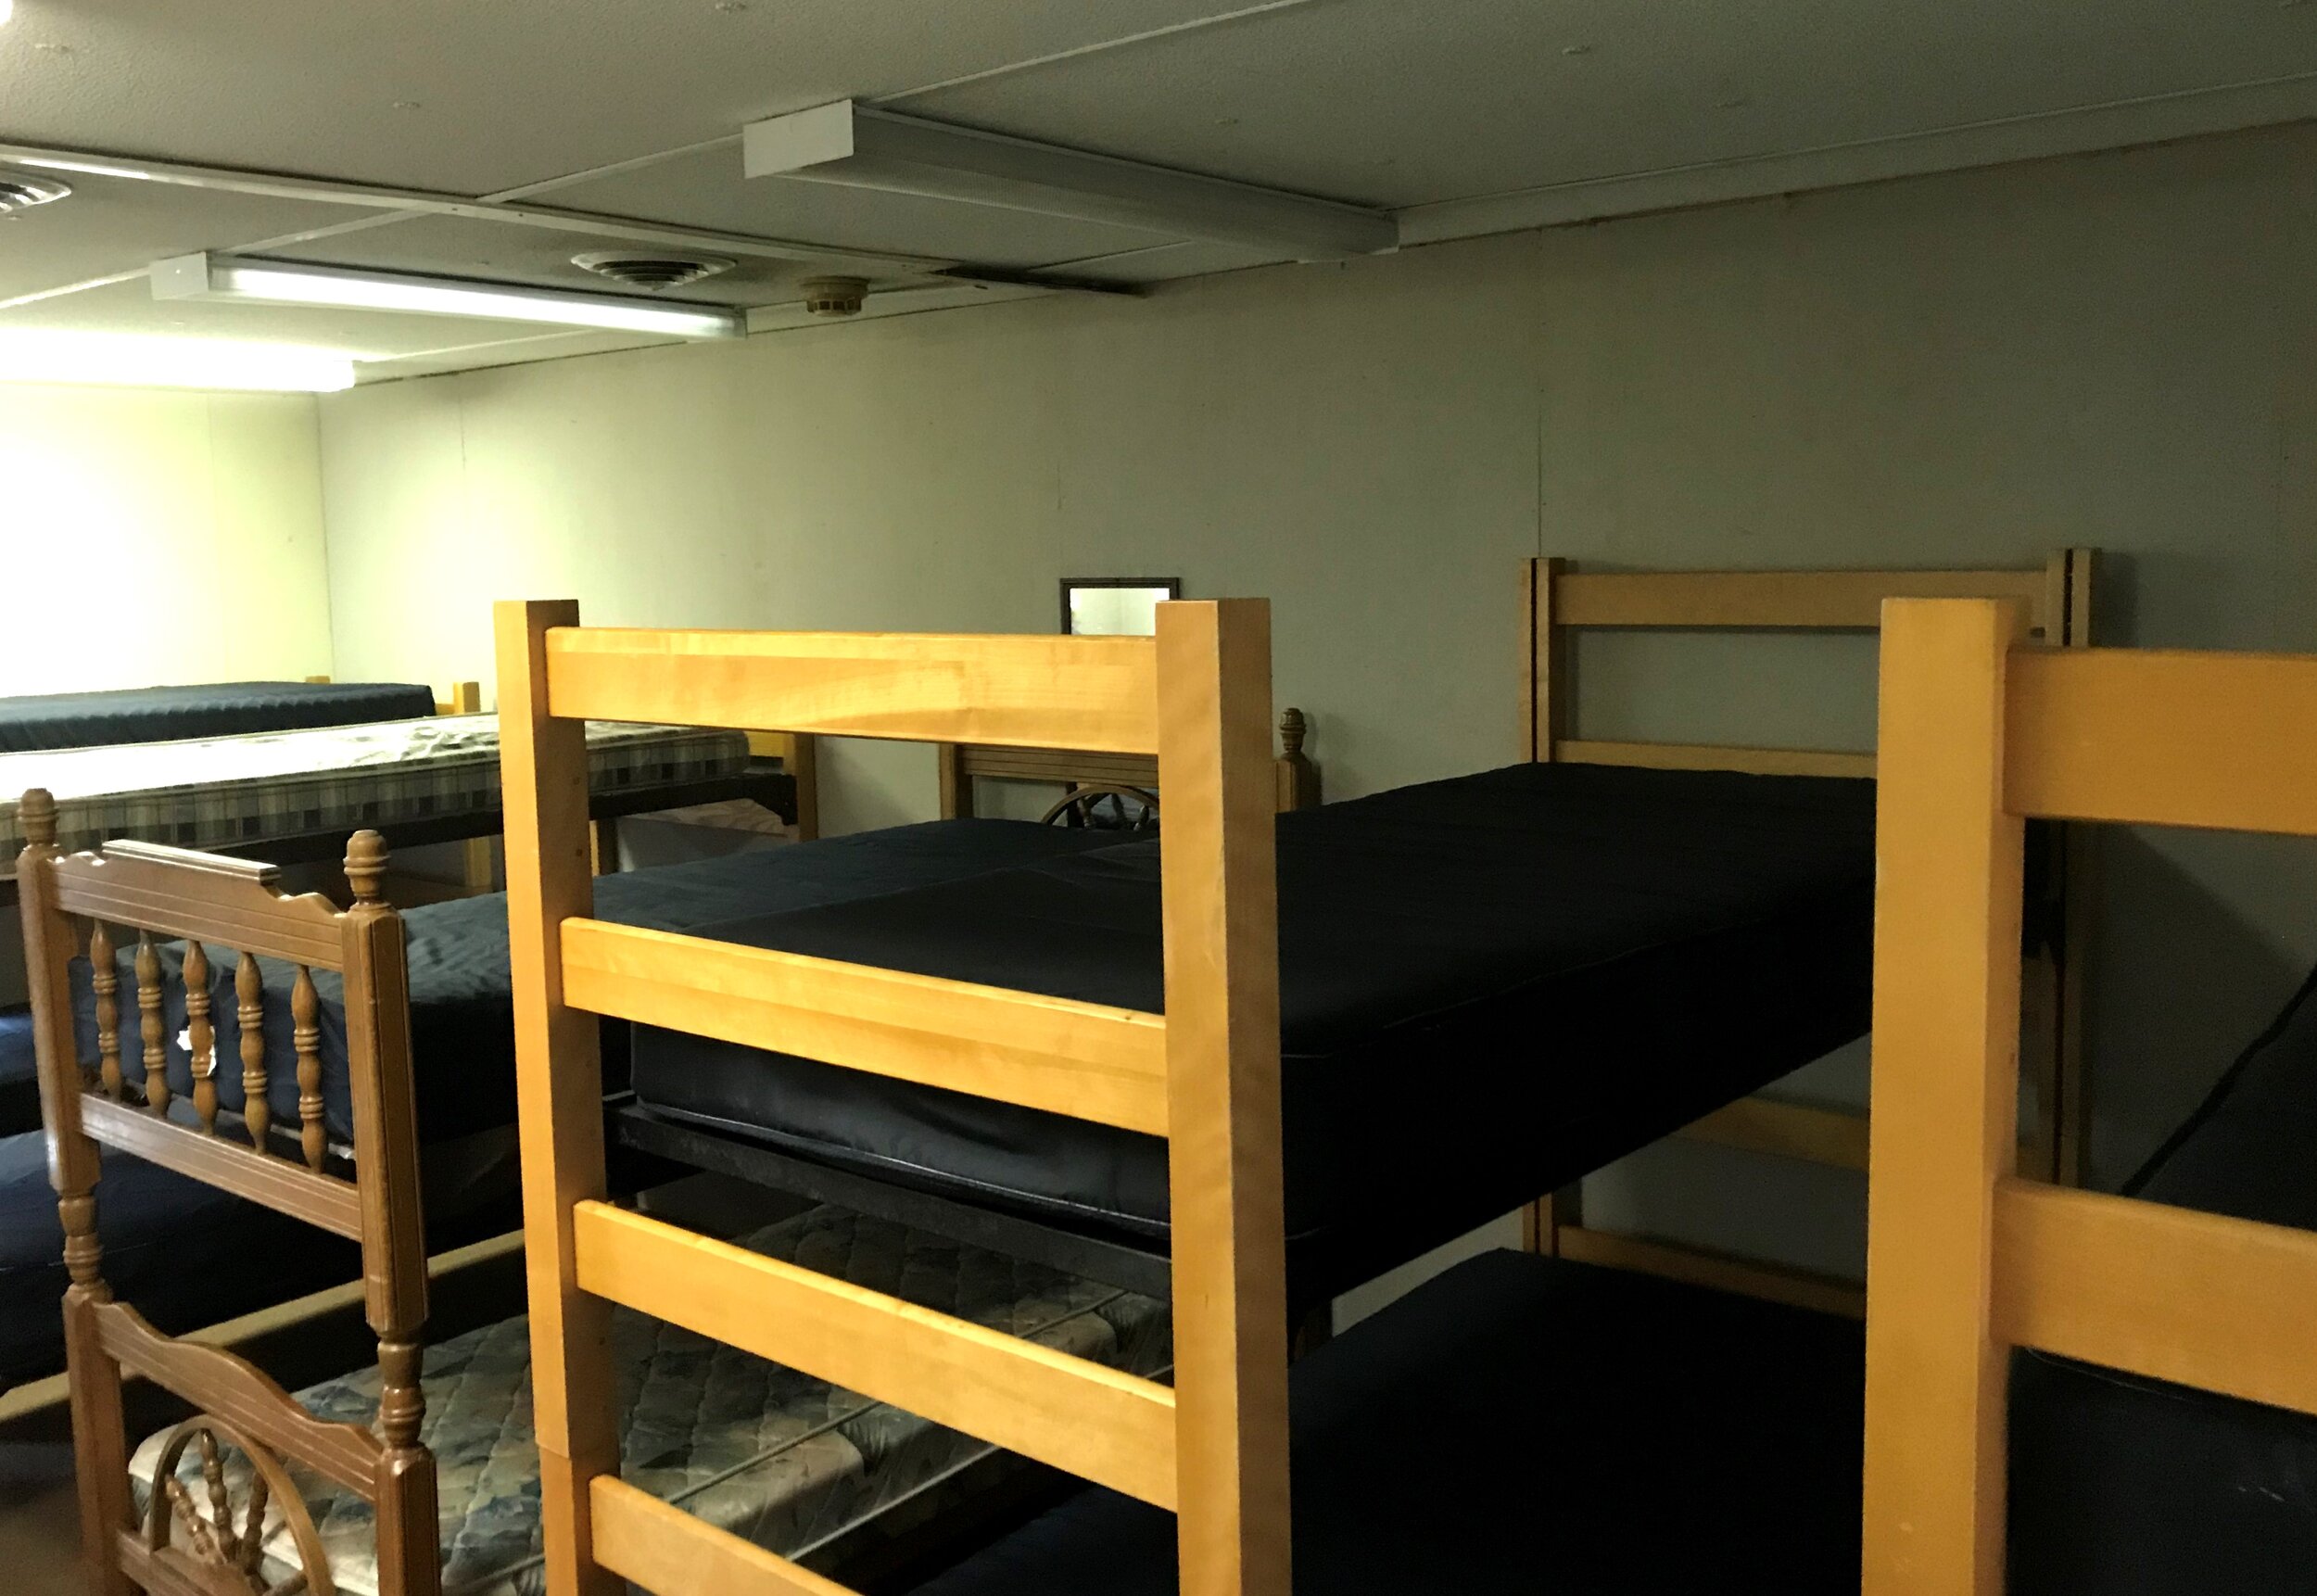  Dorm rooms feature anywhere from 10-30 beds, consisting mostly of wall to wall bunkbeds.  